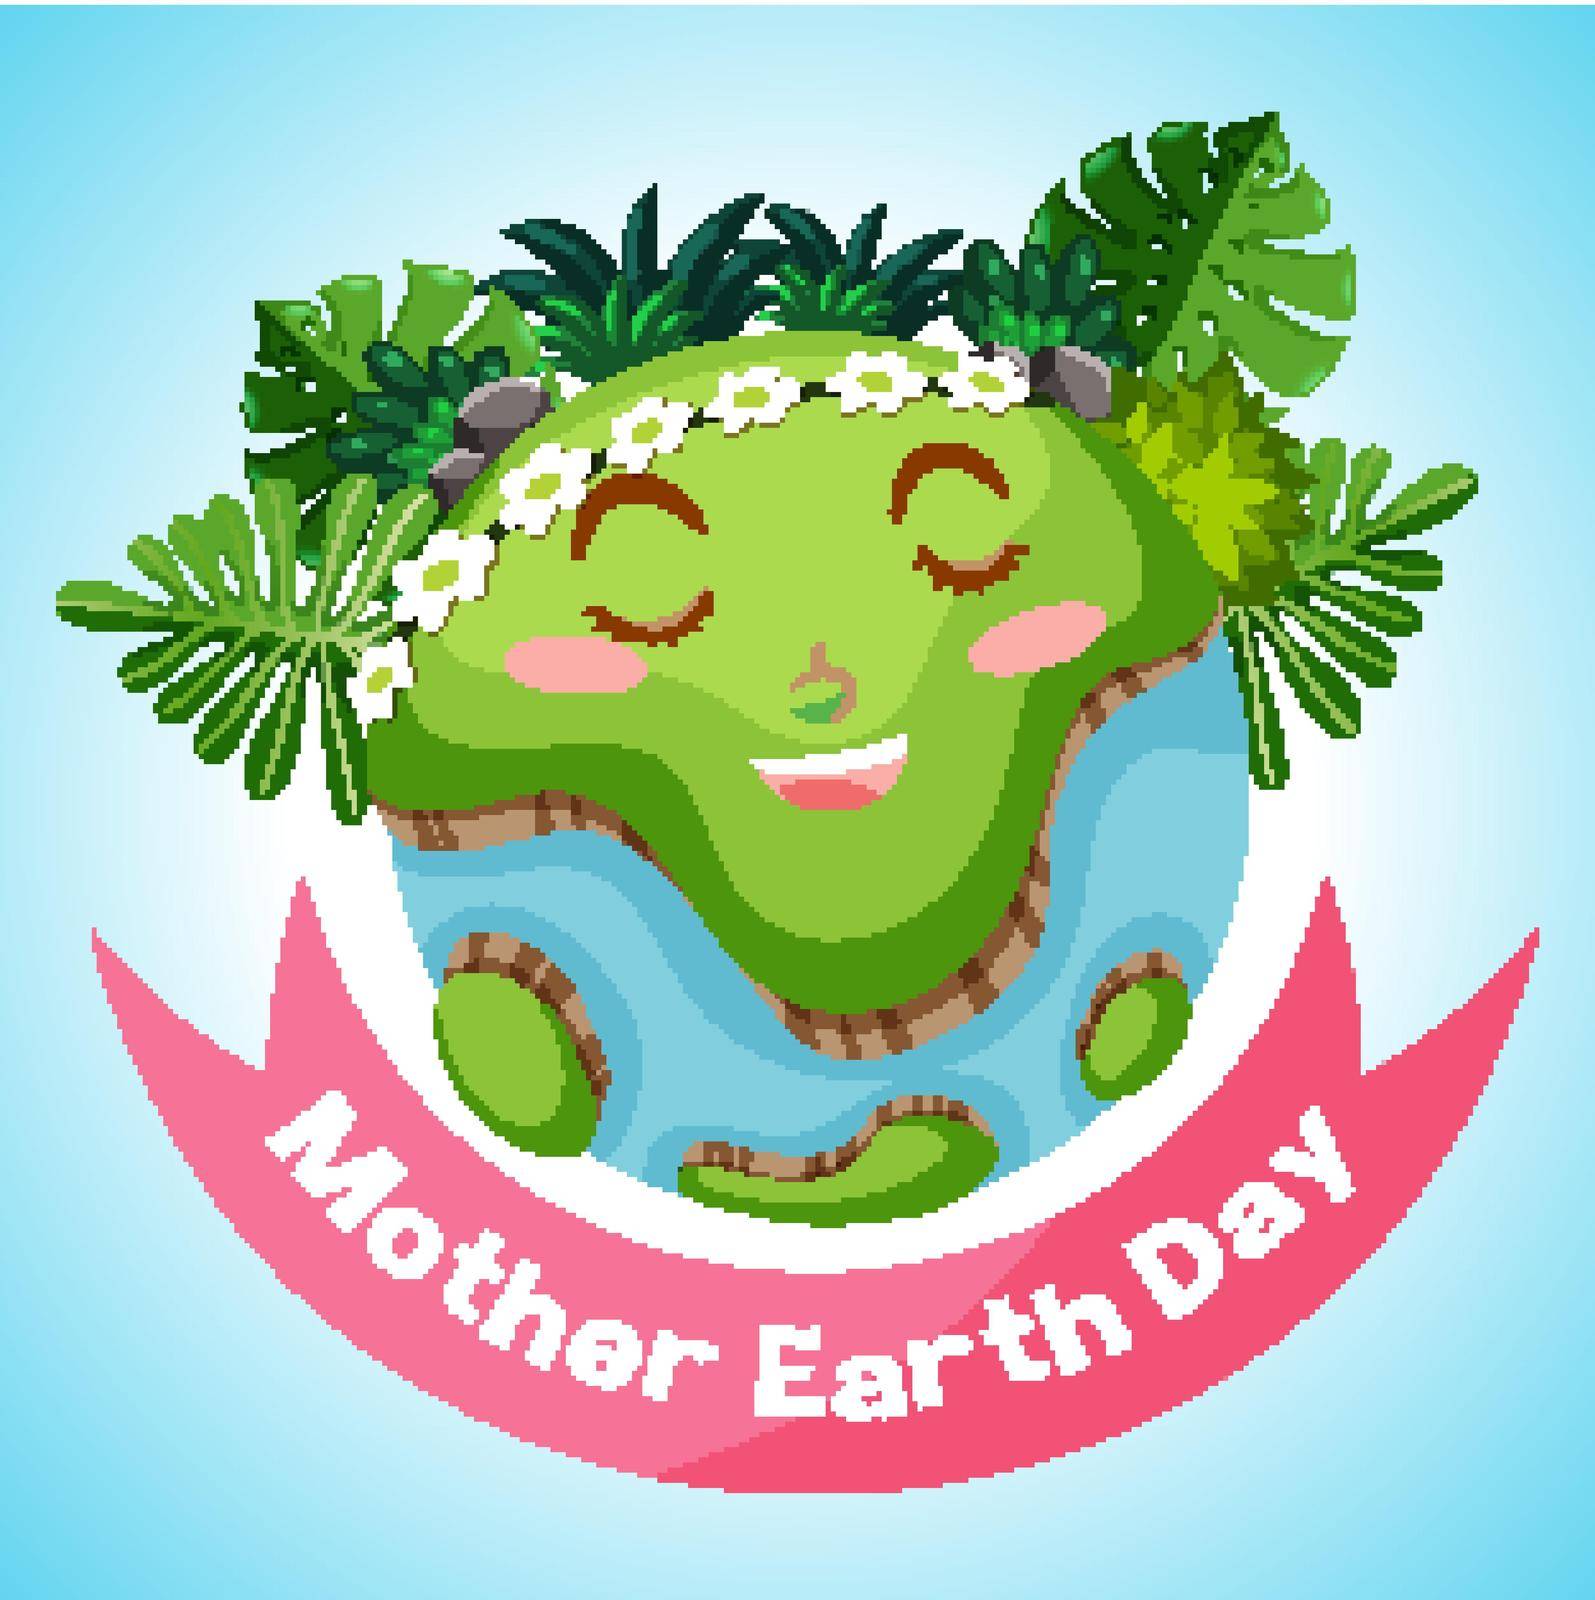 Poster design for mother earth day with smiling earth in background illustration